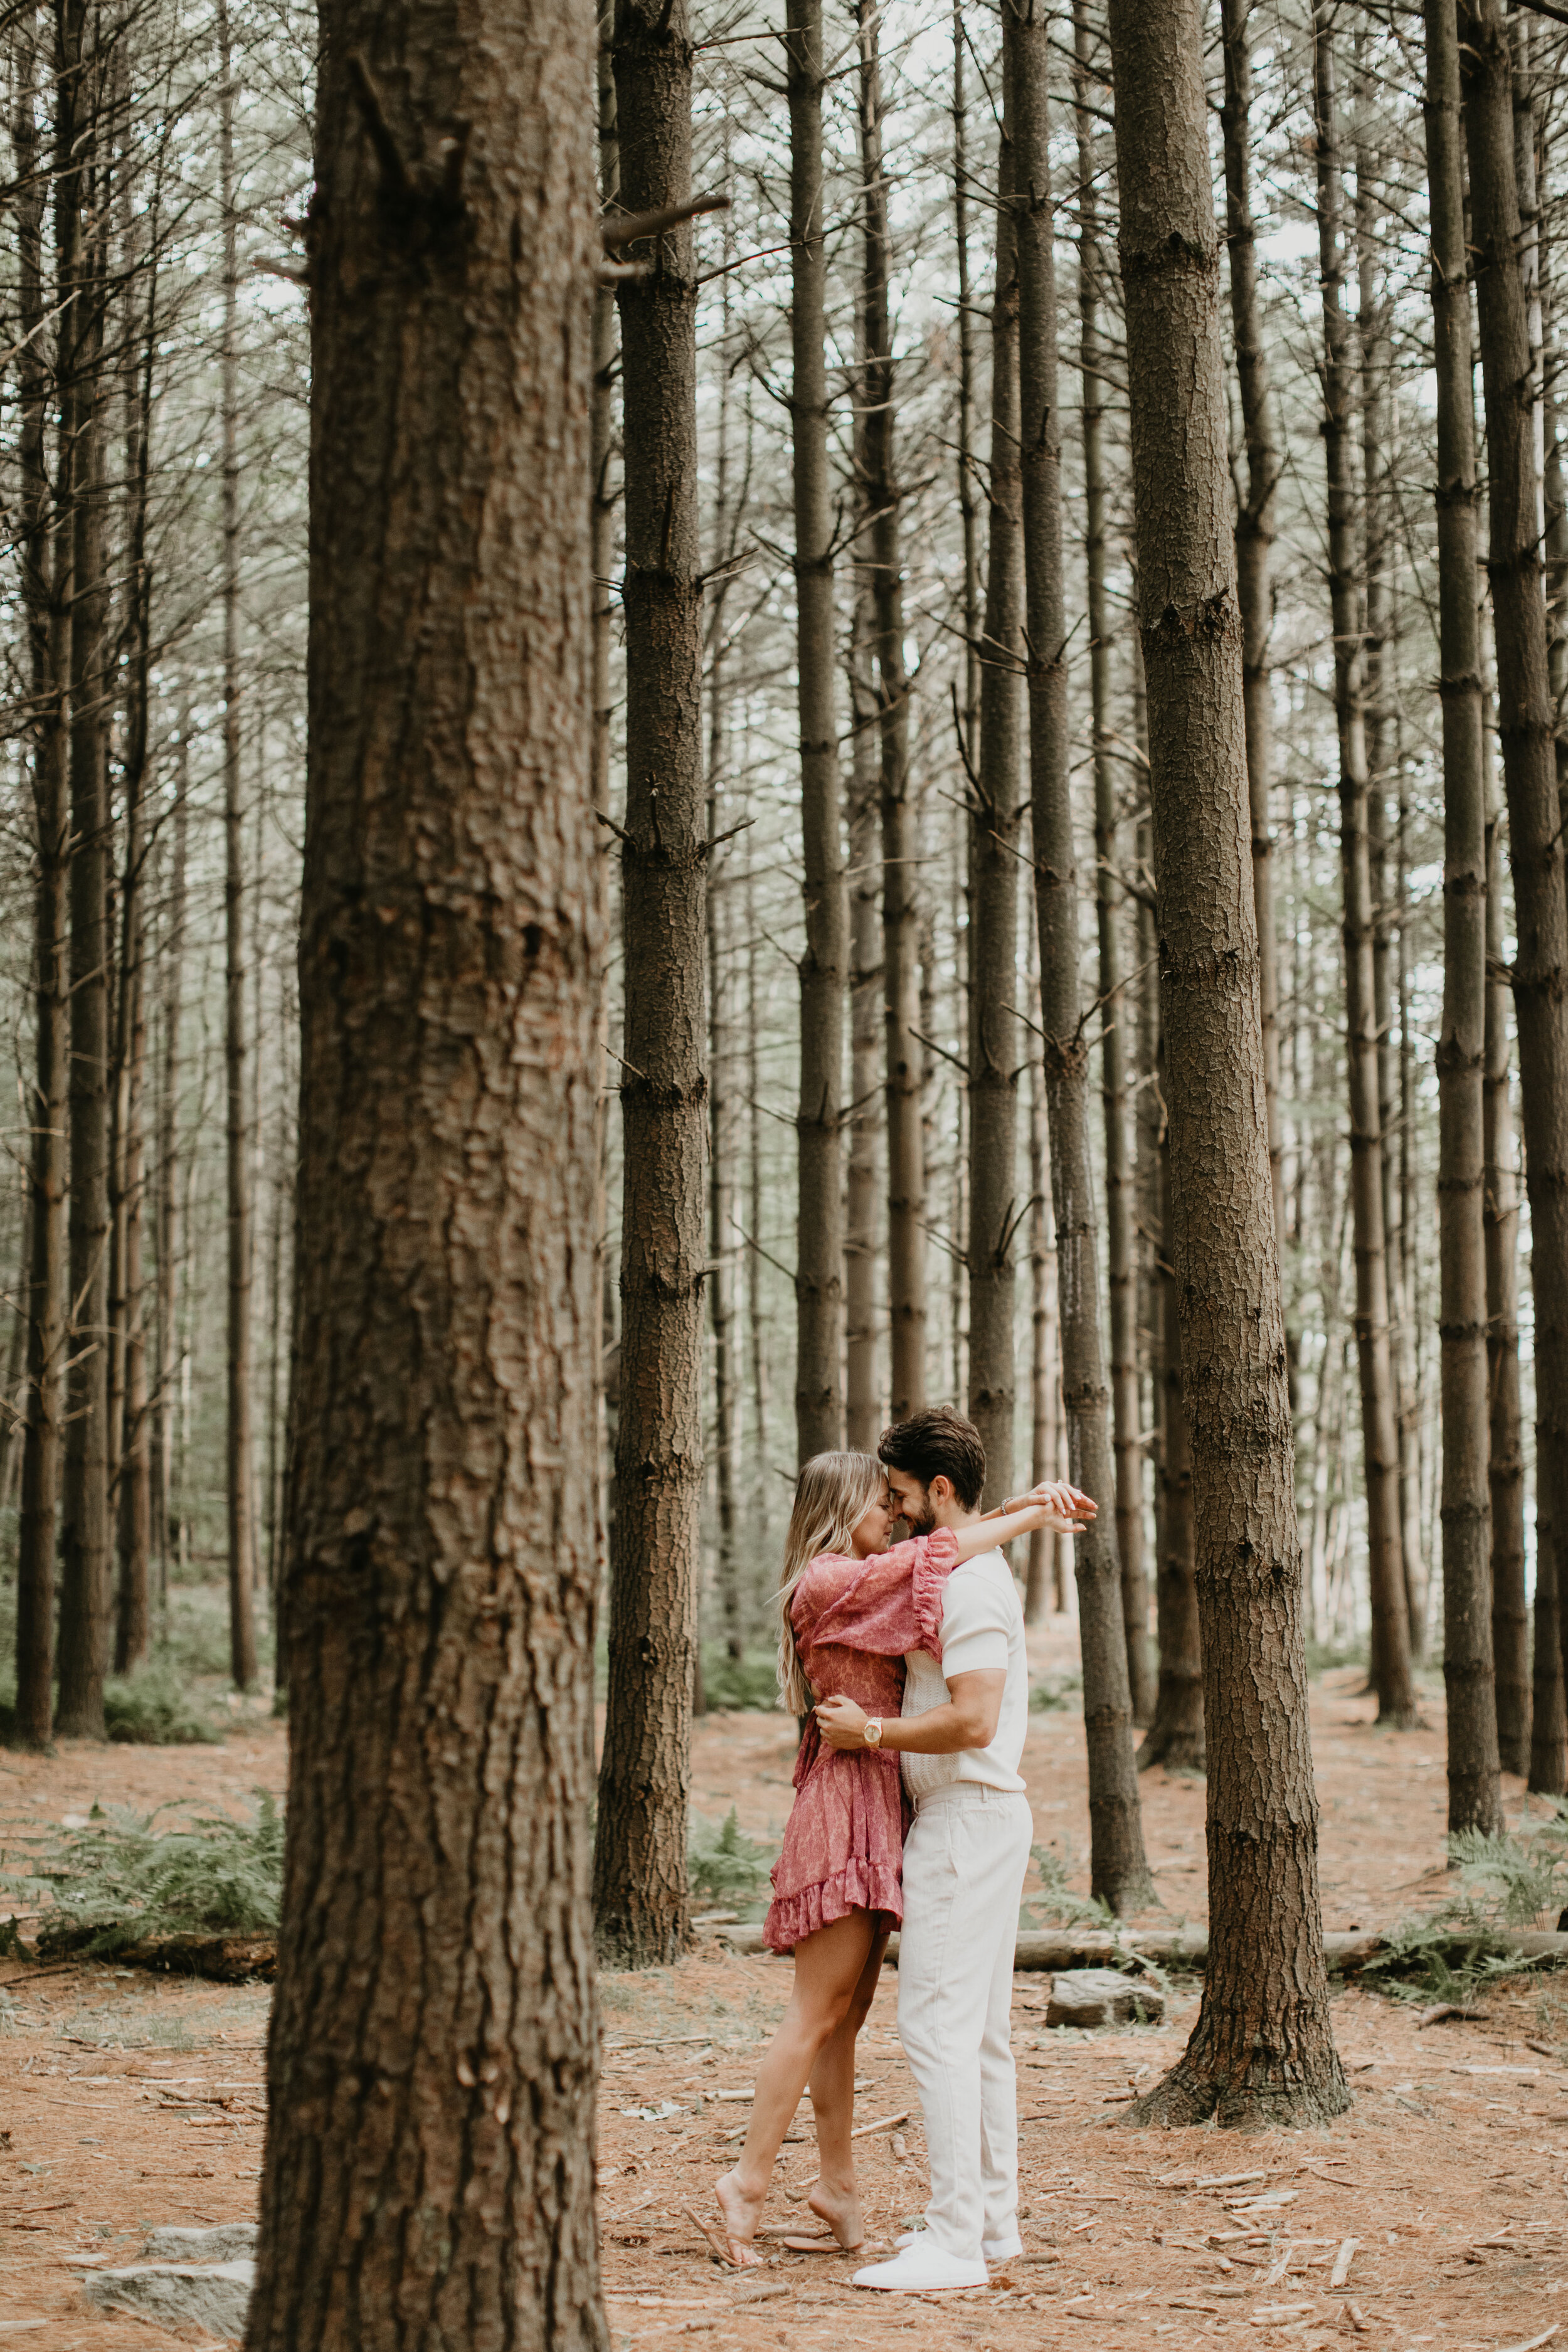 Nicole-Daacke-Photography-michaux-state-forest-elopement-adventure-engagement-session-pennsylvania-elopement-pa-elopement-photographer-gettysburg-photographer-state-park-elopement-engagement-session-pennsylvania-waterfall-107.jpg